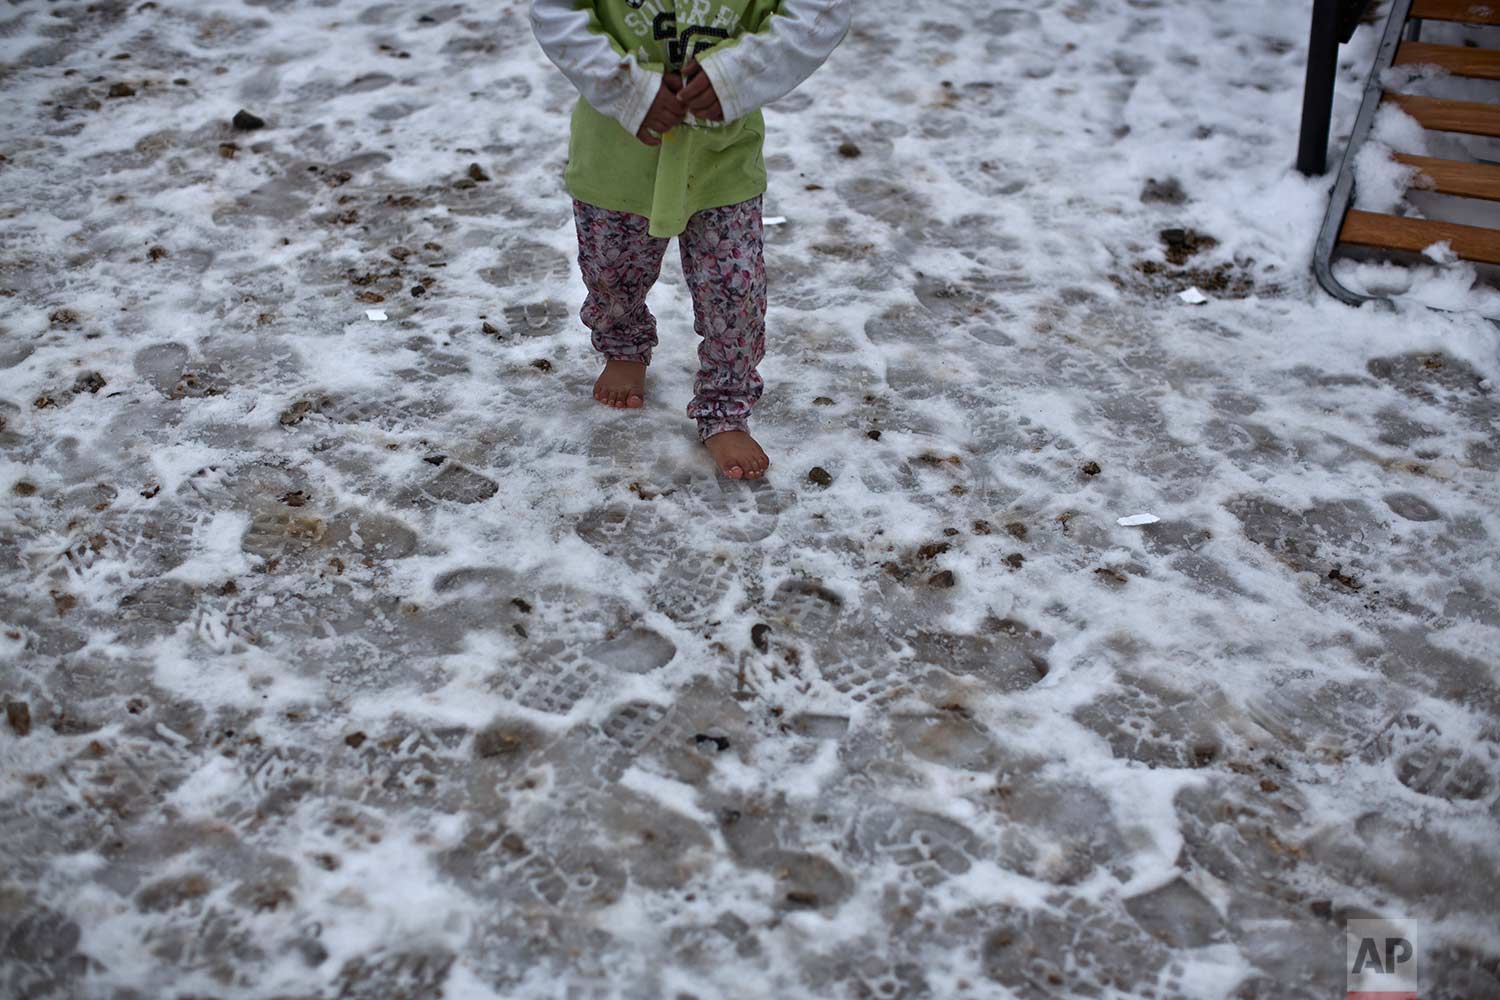  In this Wednesday, Jan. 11, 2017 photo, a Syrian refugee child walks barefoot on frozen ground at the refugee camp of Ritsona about 86 kilometers (53 miles) north of Athens. The European Commission said conditions for refugees on islands and other c